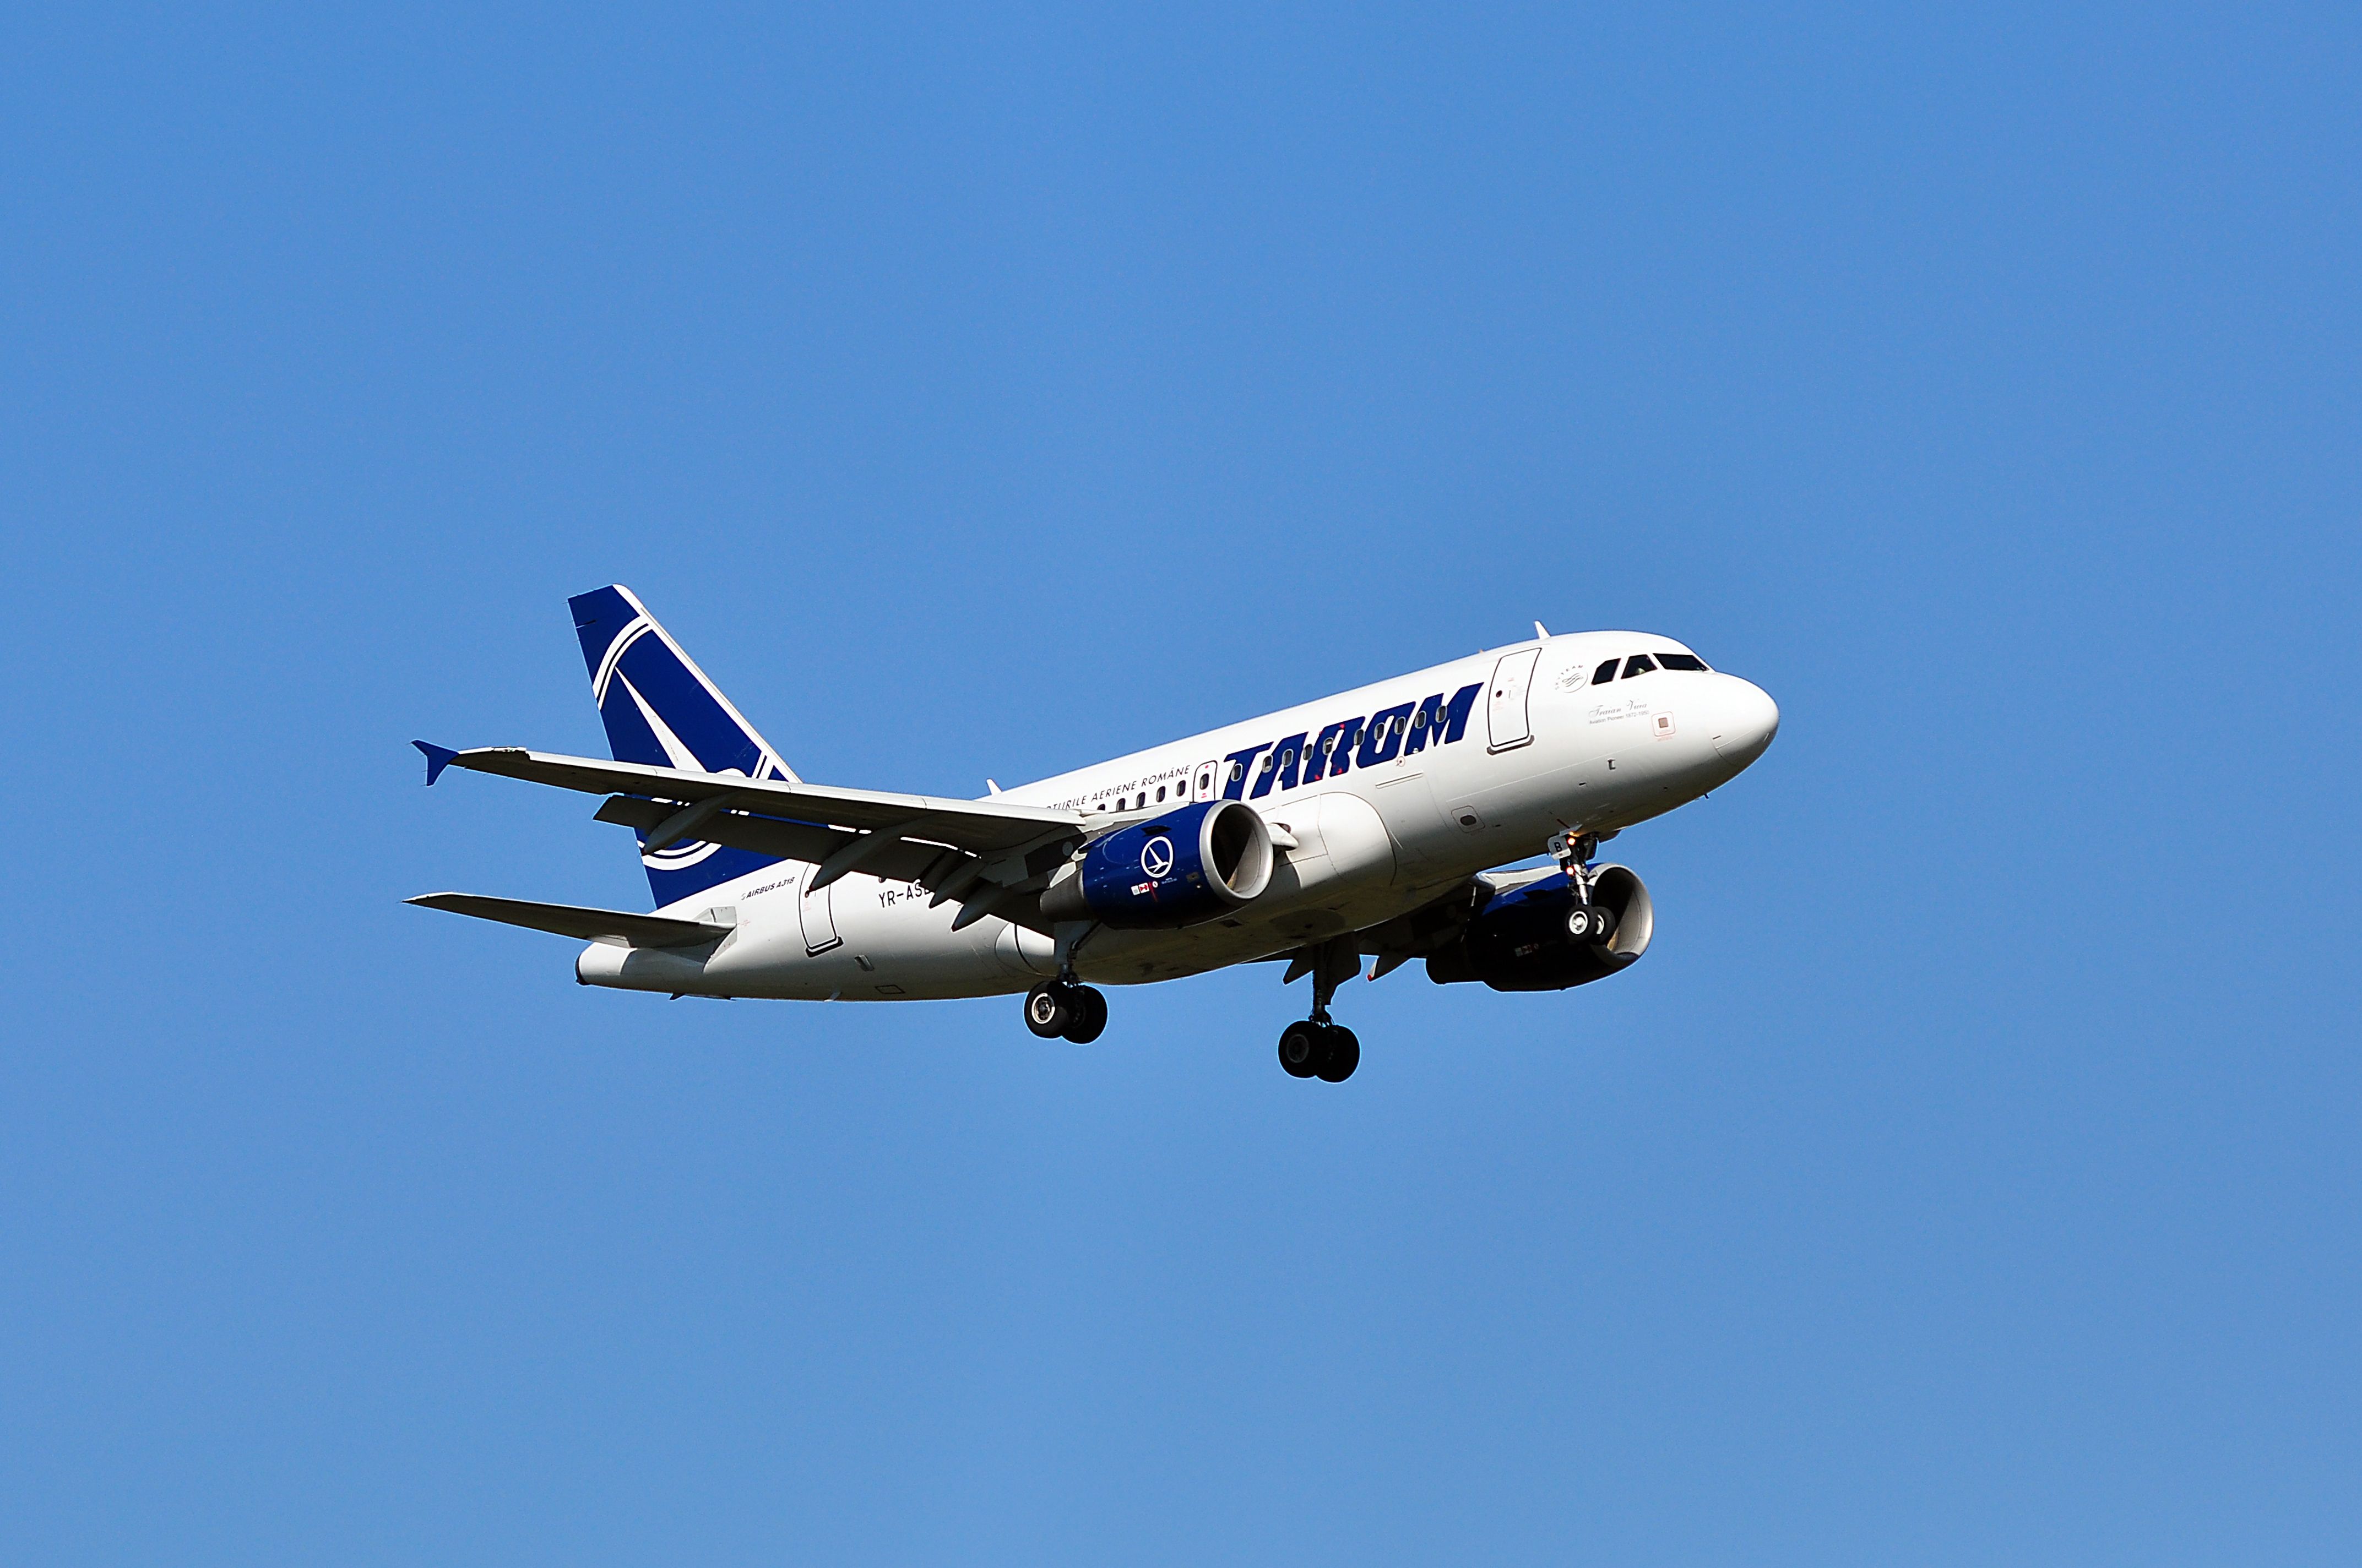 A TAROM Airbus A318 flying in the sky.